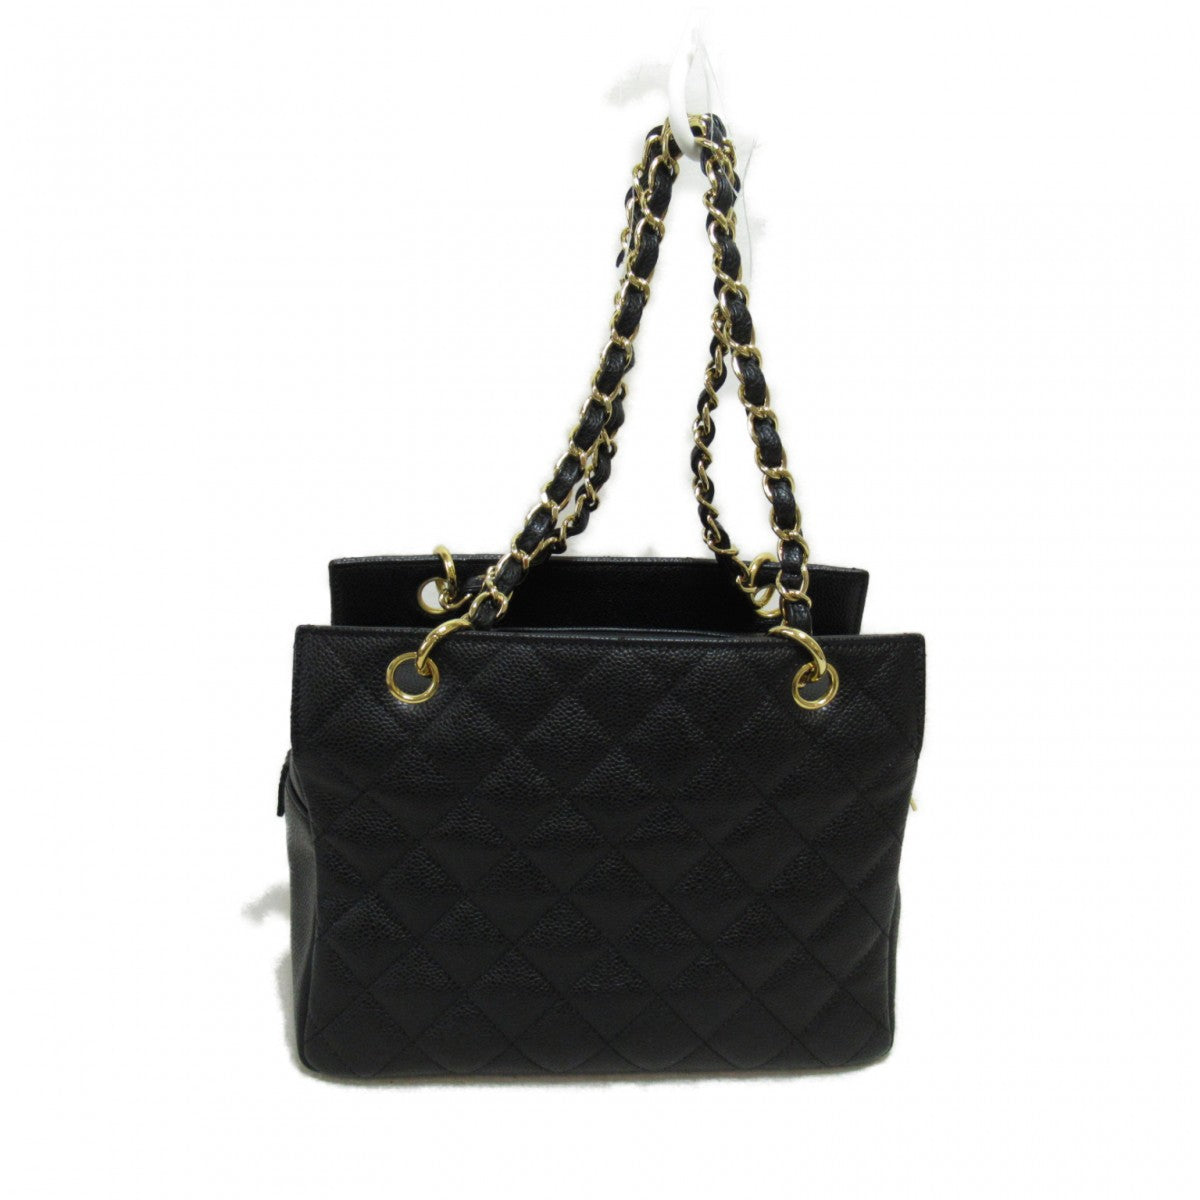 CC Quilted Caviar Chain Tote Bag